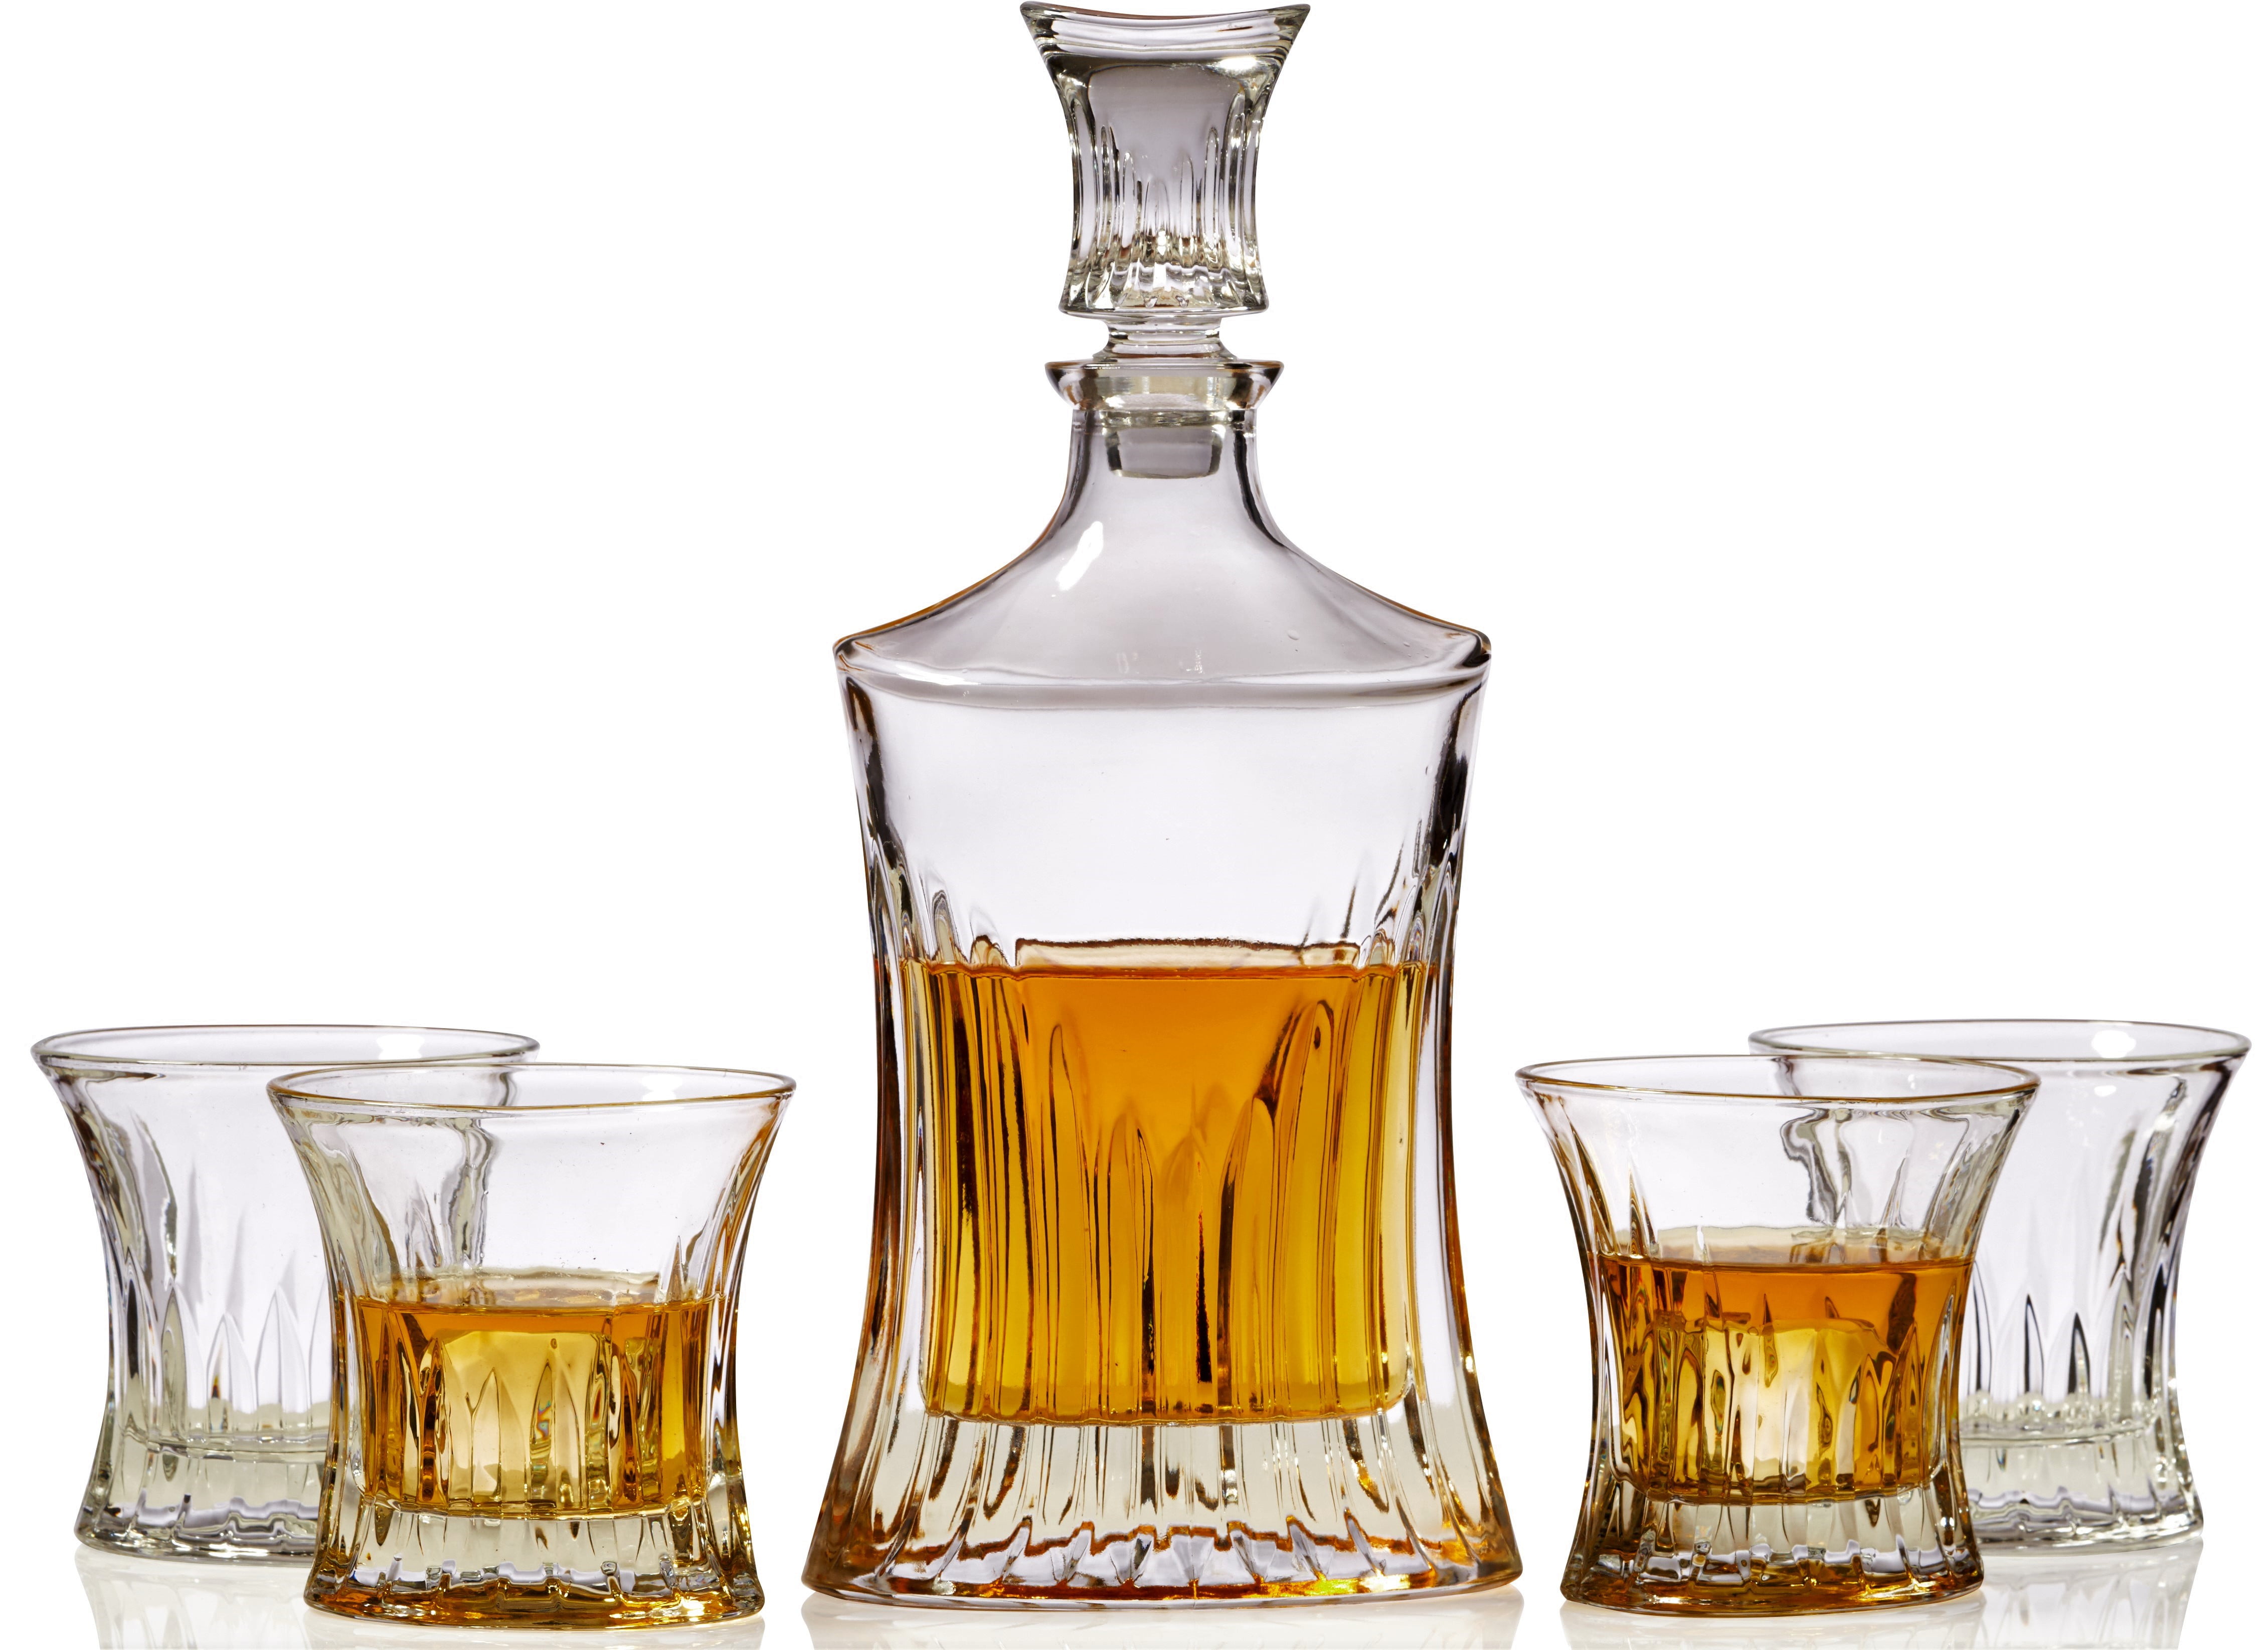 FURSARCAR 5 Piece Whiskey Decanter Sets,Wine Decanter Set With  4 Whiskey Glasses,Liquor Glass Decanter Set for Alcohol,Rum, Scotch,  Bourbon, Whisky,Old Fashioned Whiskey glasses Men or Women: Liquor Decanters